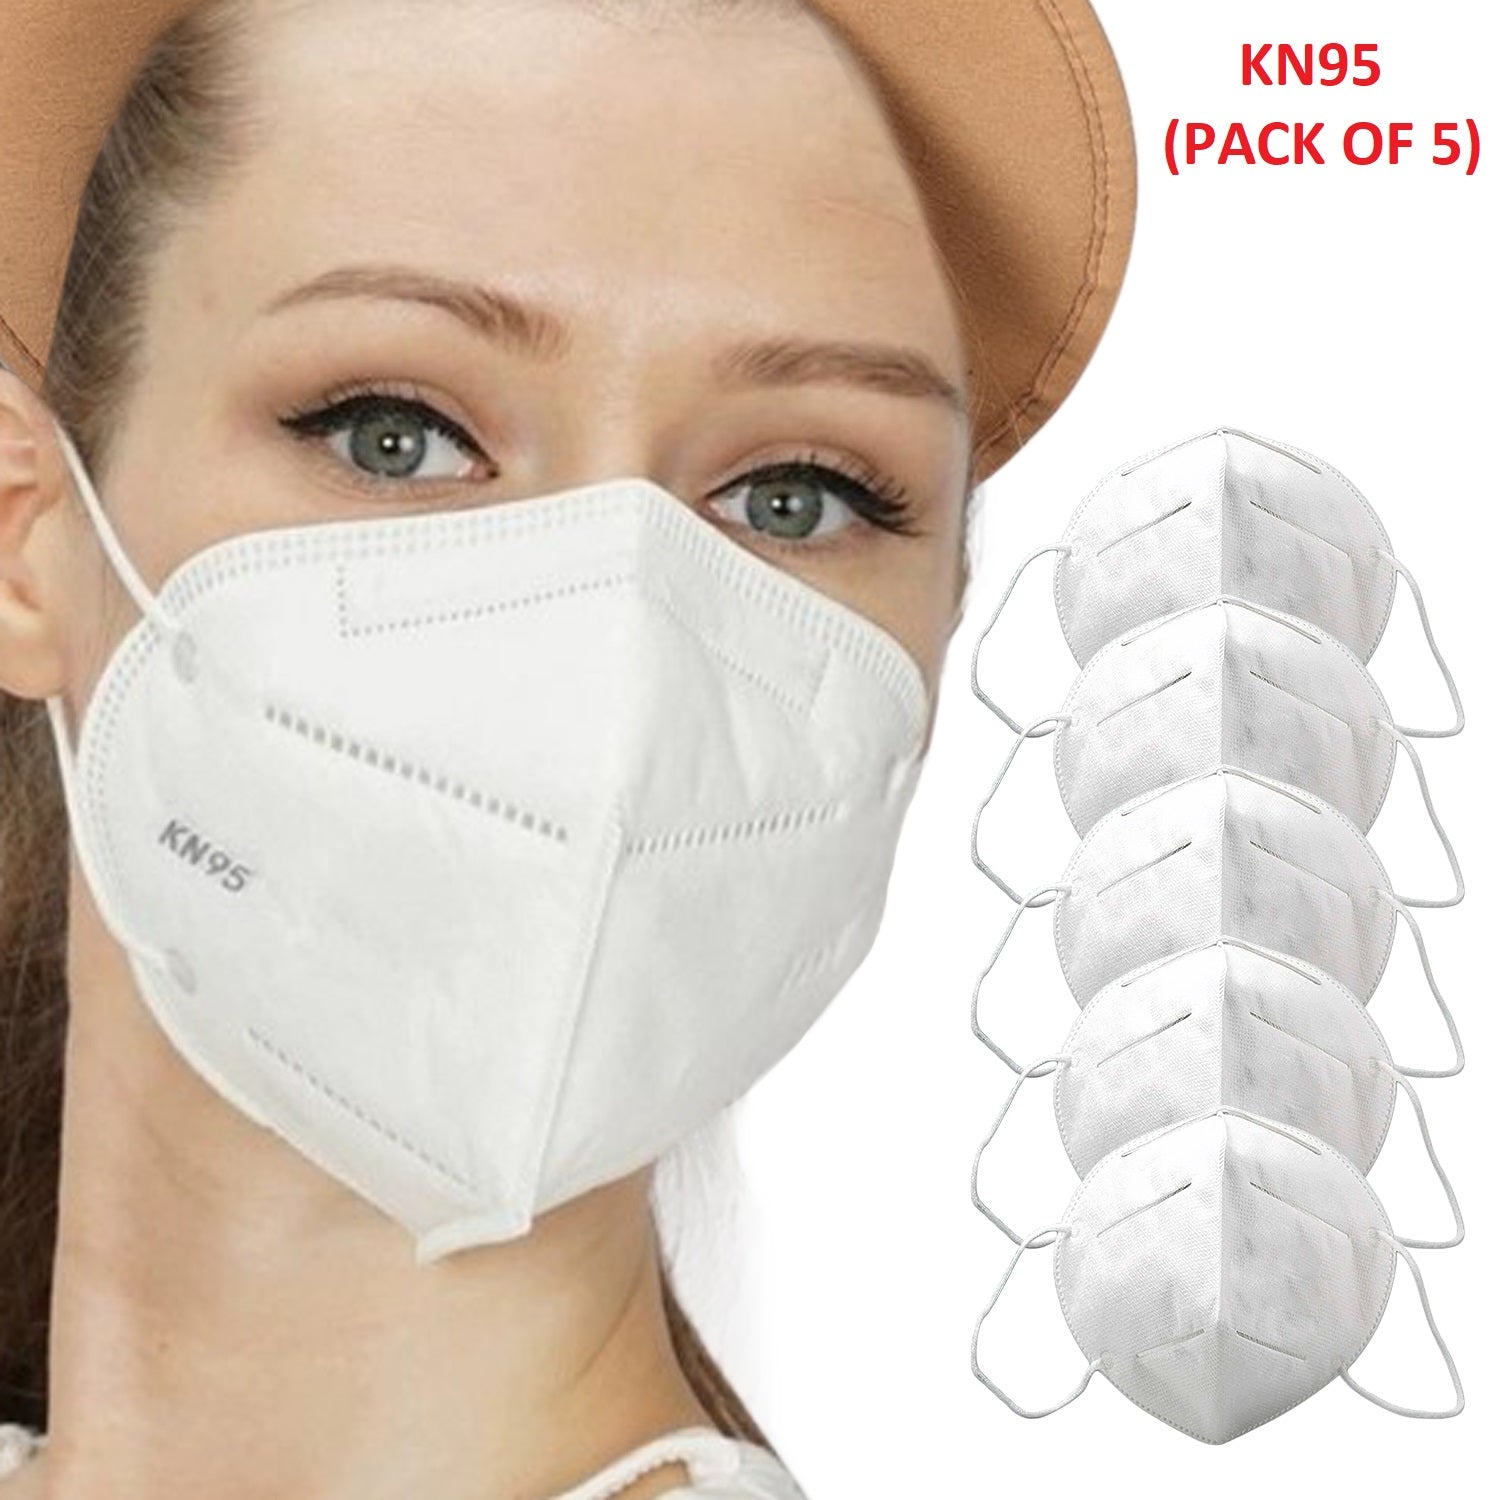 Lightahead KN95 4-Layer Mouth Surgical Face Mask for Germ Virus Pollution PM2.5 Protection-5 Masks